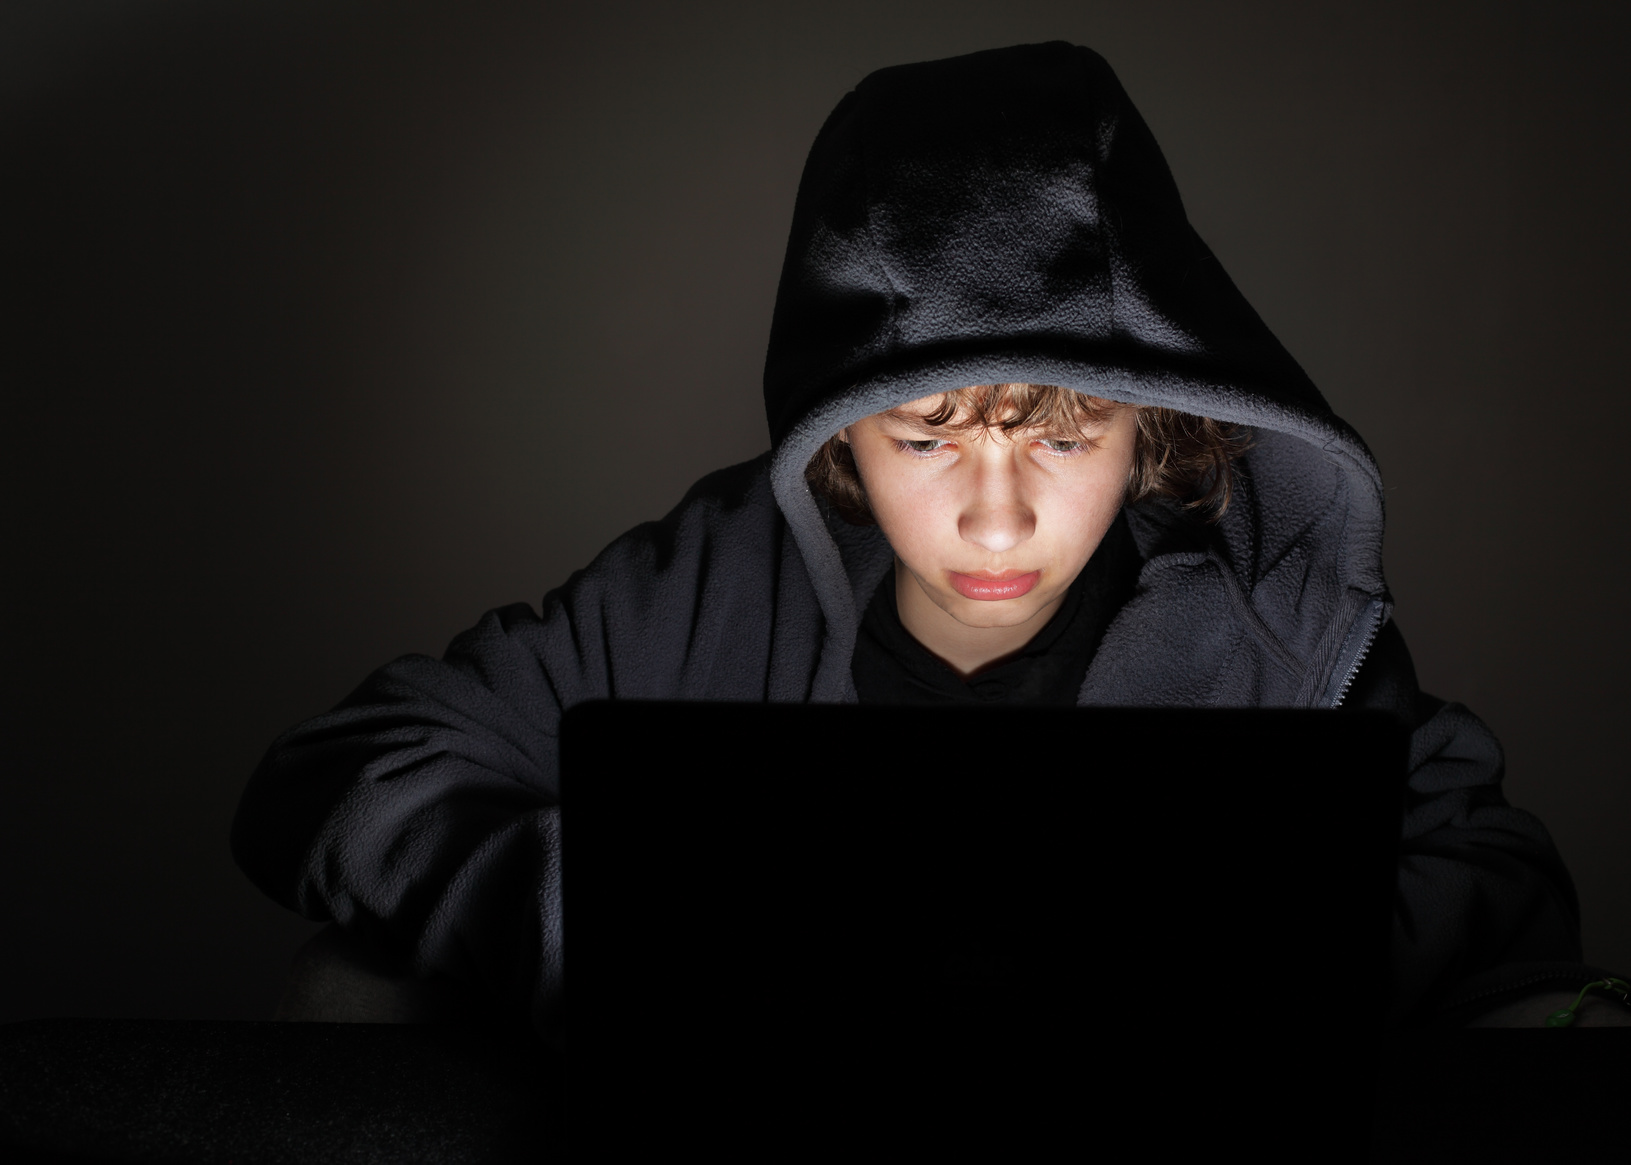 A young person wearing a hood intently looks at a laptop screen, which illuminates their face in a dark room.